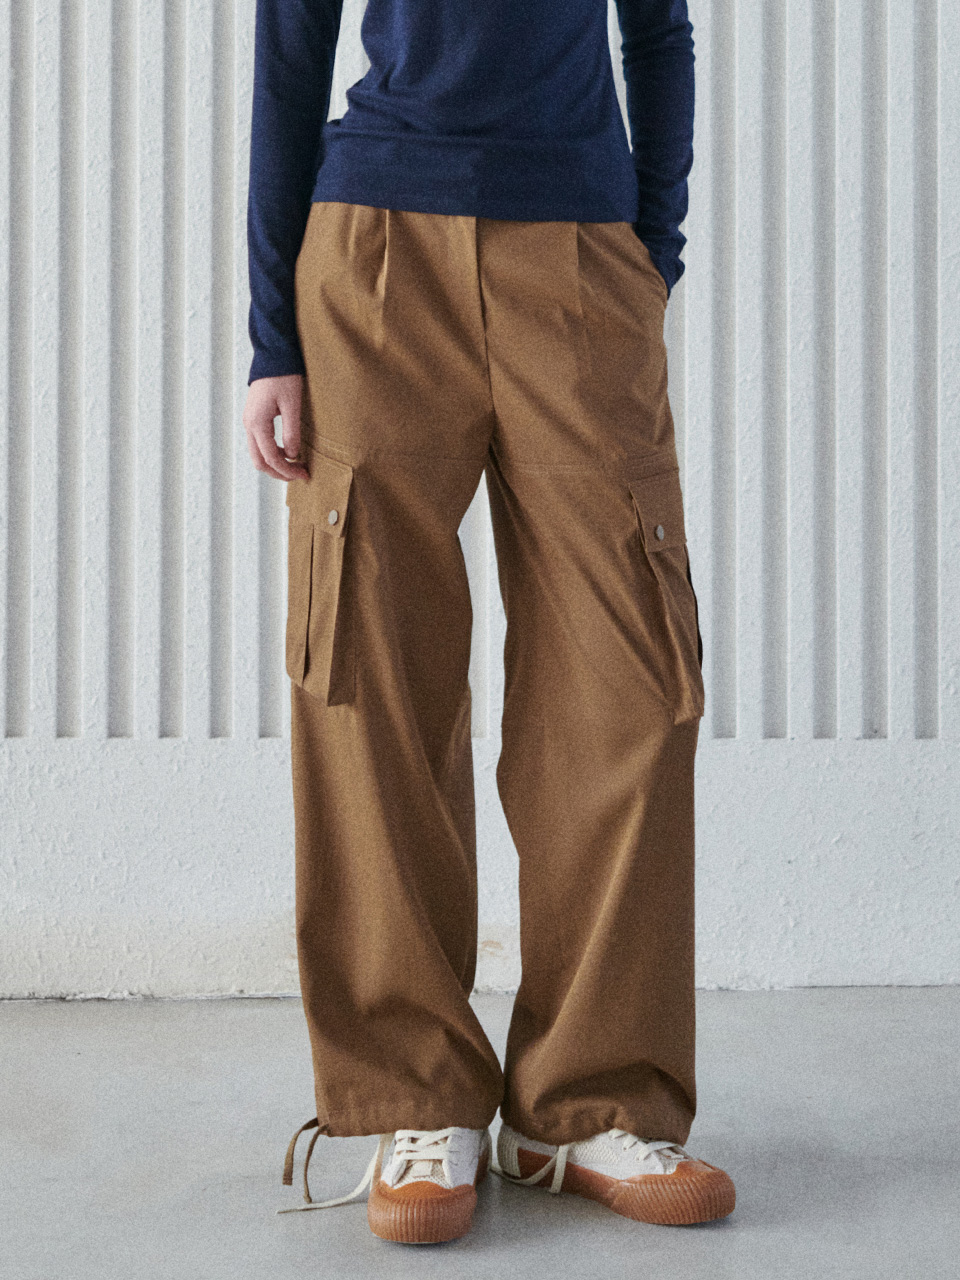 HACIE - CARGO PANTS WITH BINDING DETAIL [3컬러]